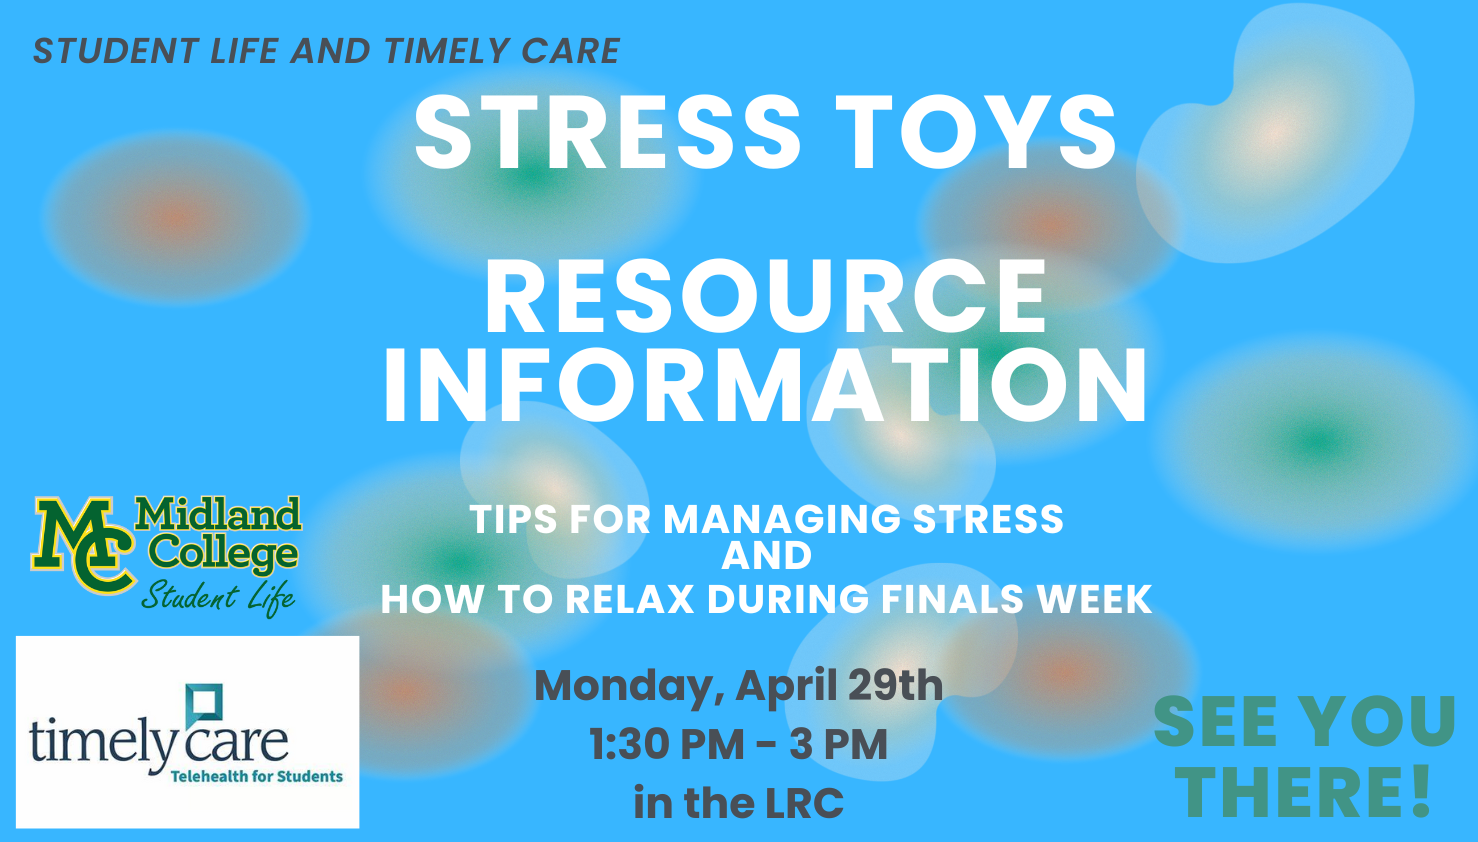 Finals Week Stress Advice from TimelyCare